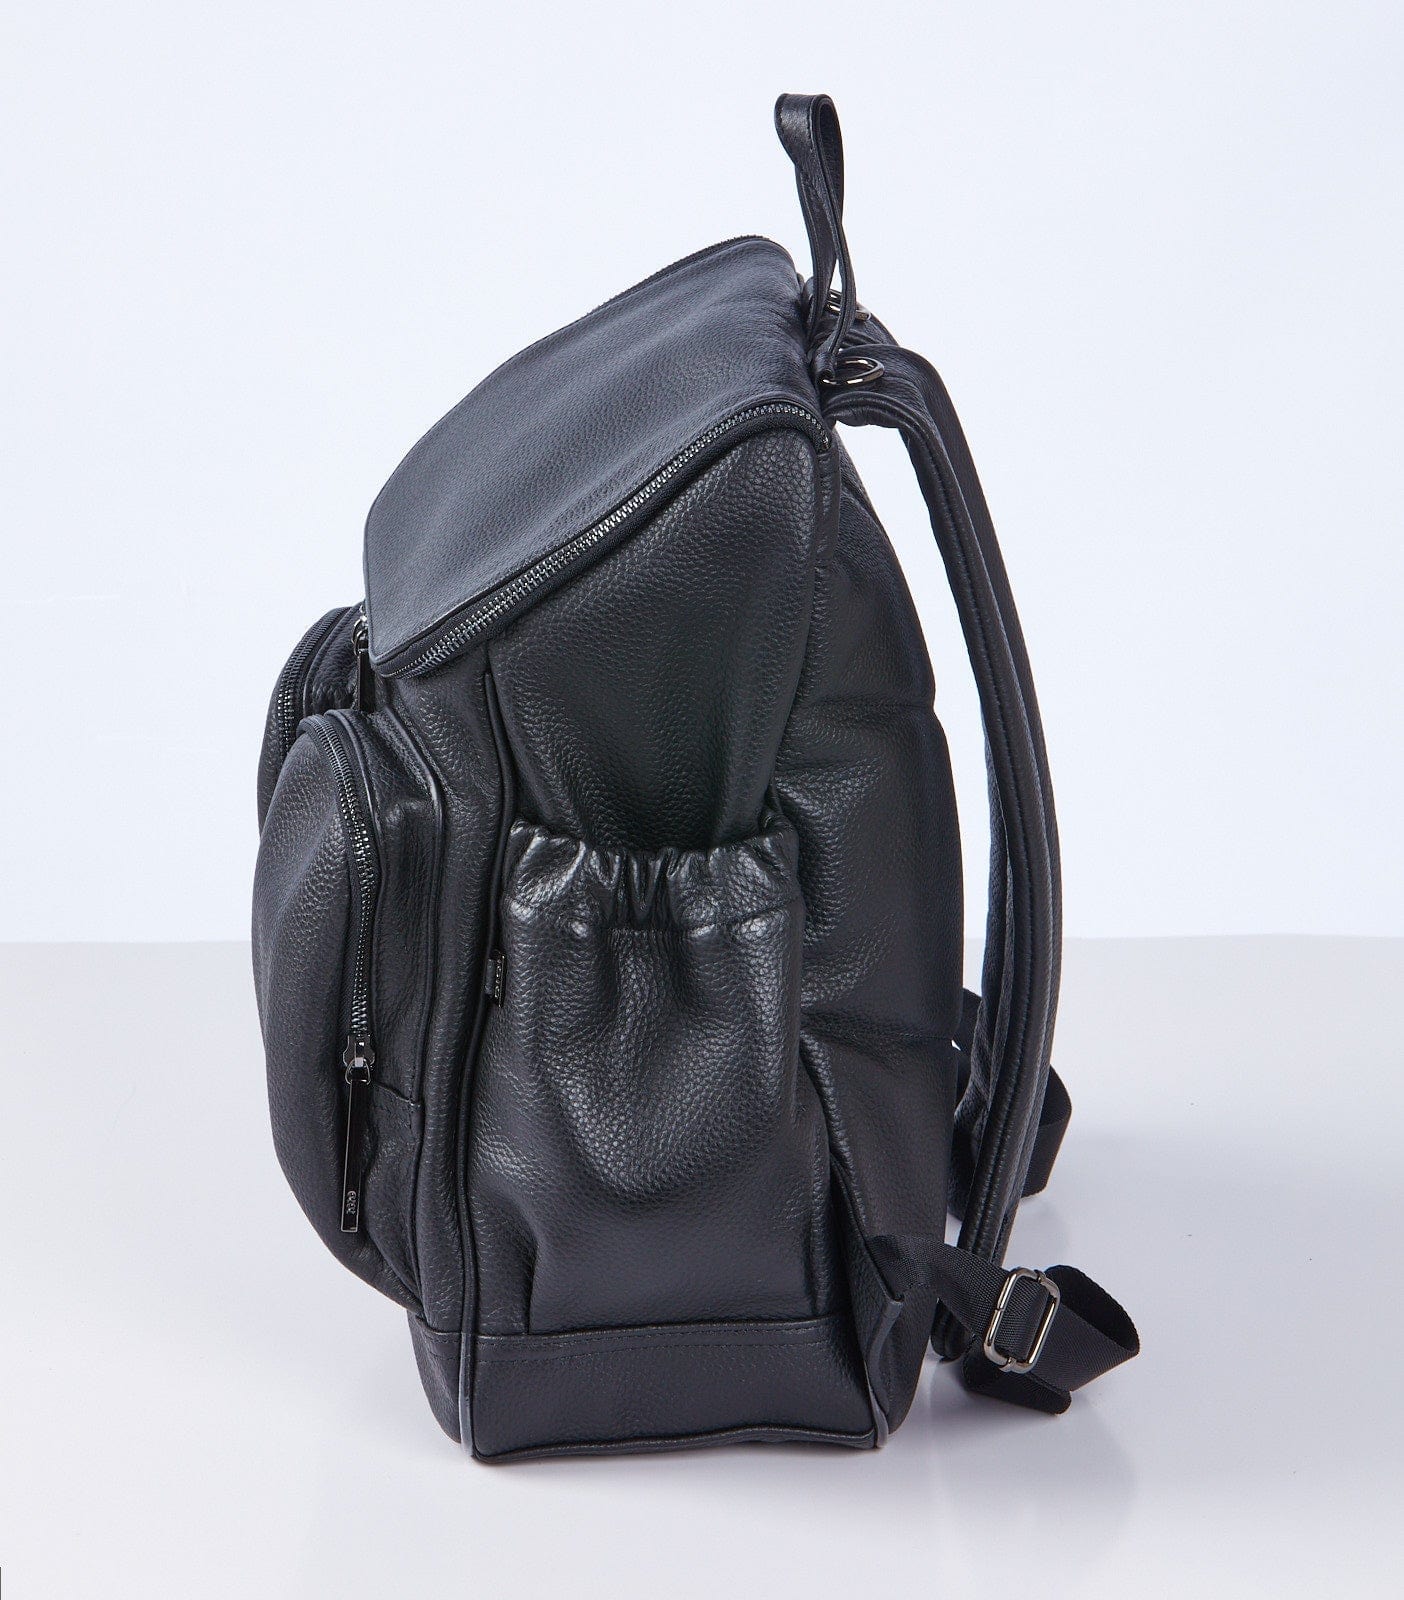 OiOi Baby Care Leather Nappy Backpack - Jet Black